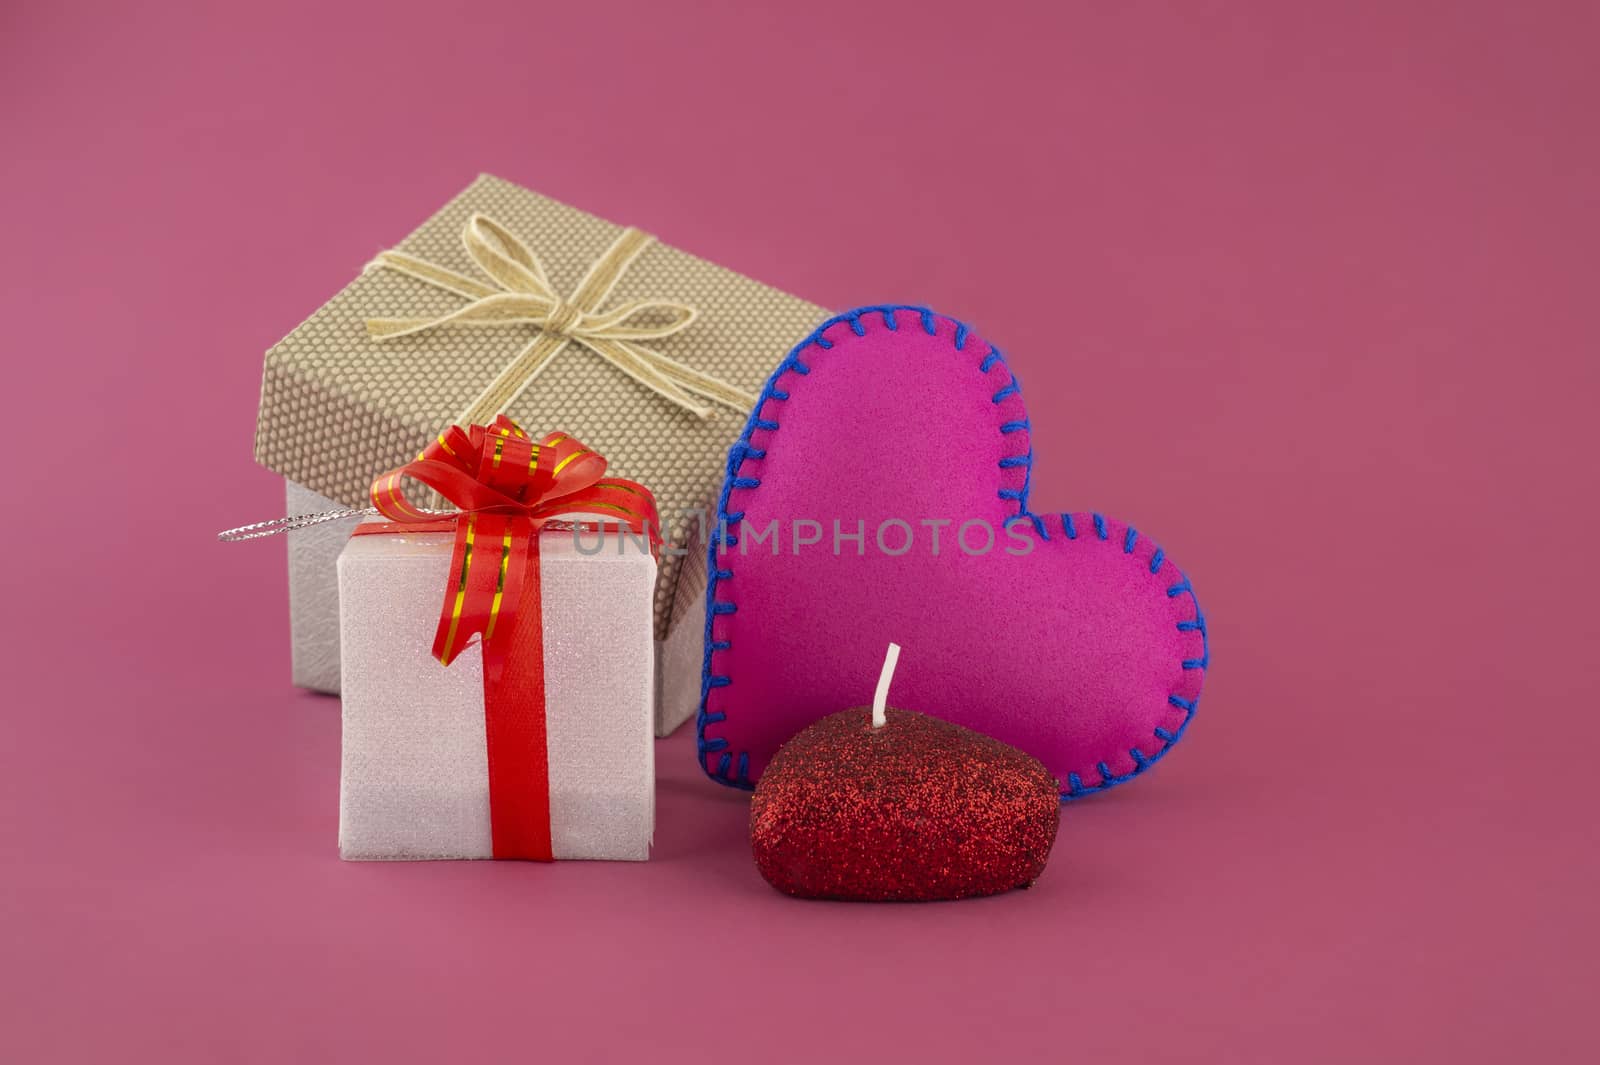 Romantic still life with hand sewn textile pink heart, candle, decorative gifts and red envelope on pink background with copy space